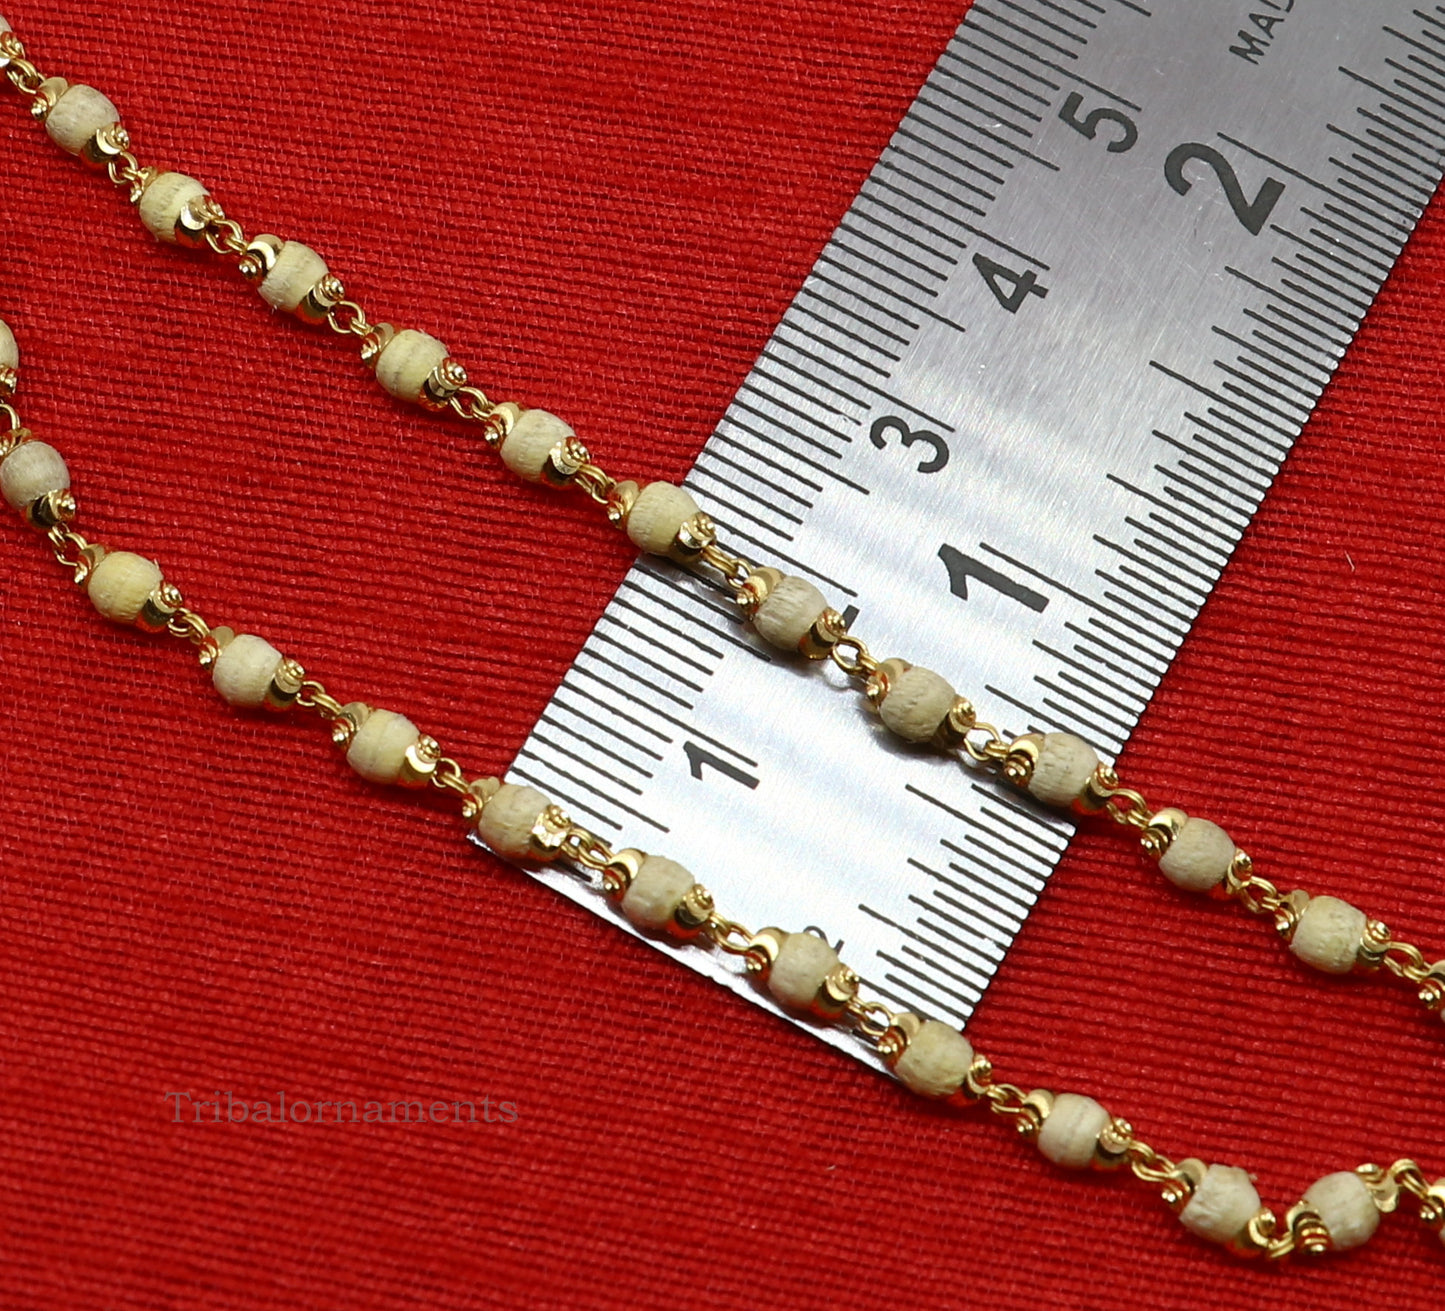 22kt yellow gold 3mm basil rosary(tulsi) chain necklace, Gorgeous customized beaded chain, excellent wedding gifting jewelry ch264 - TRIBAL ORNAMENTS